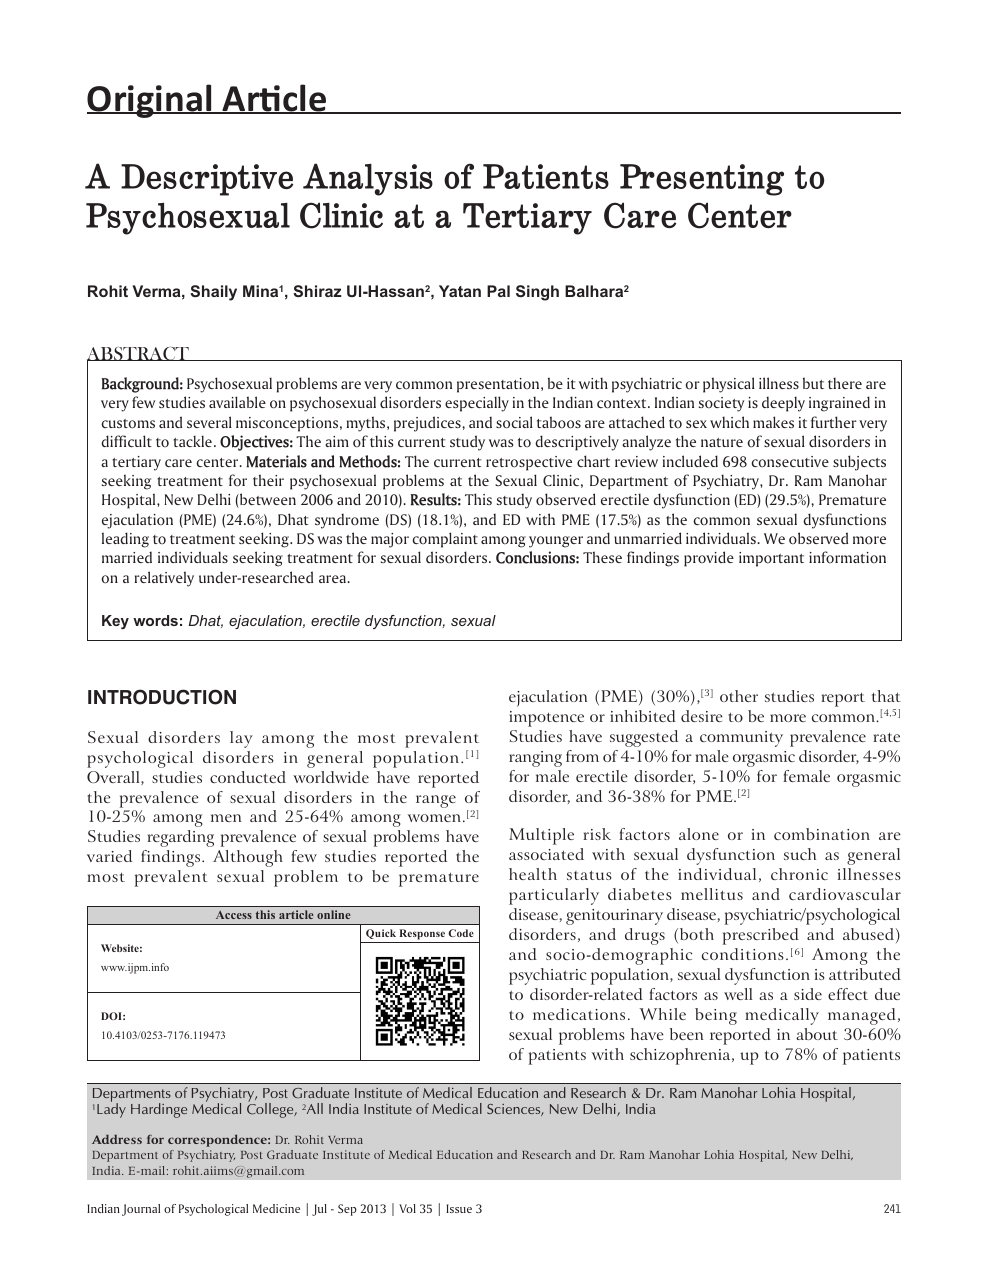 A descriptive analysis of patients presenting to psychosexual clinic at a tertiary care center